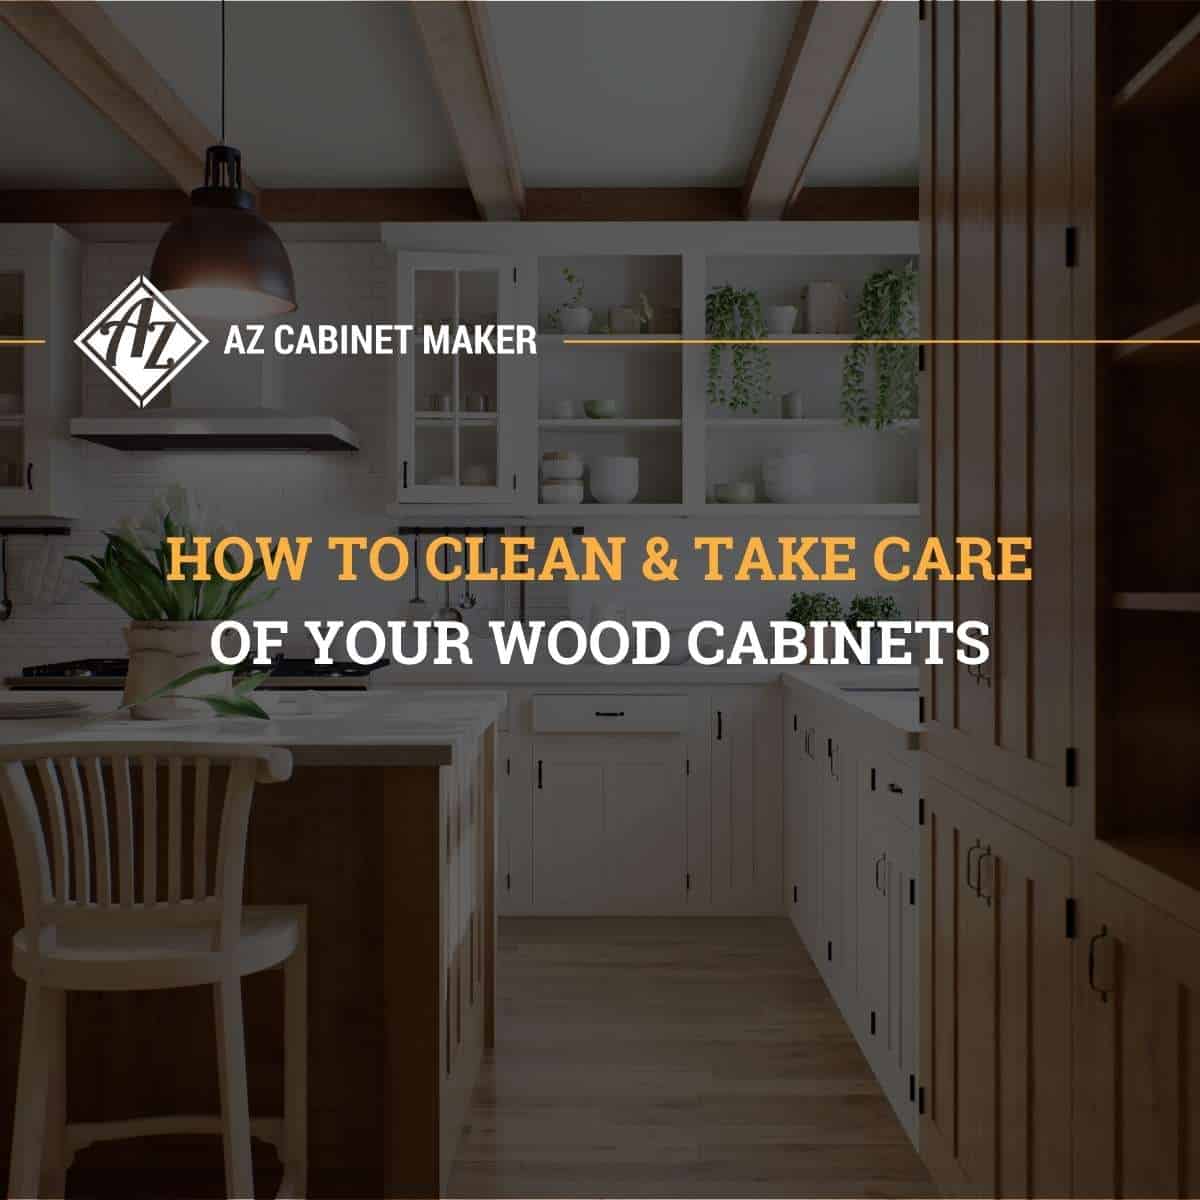 How To Clean & Take Care Of Your Wood Cabinets